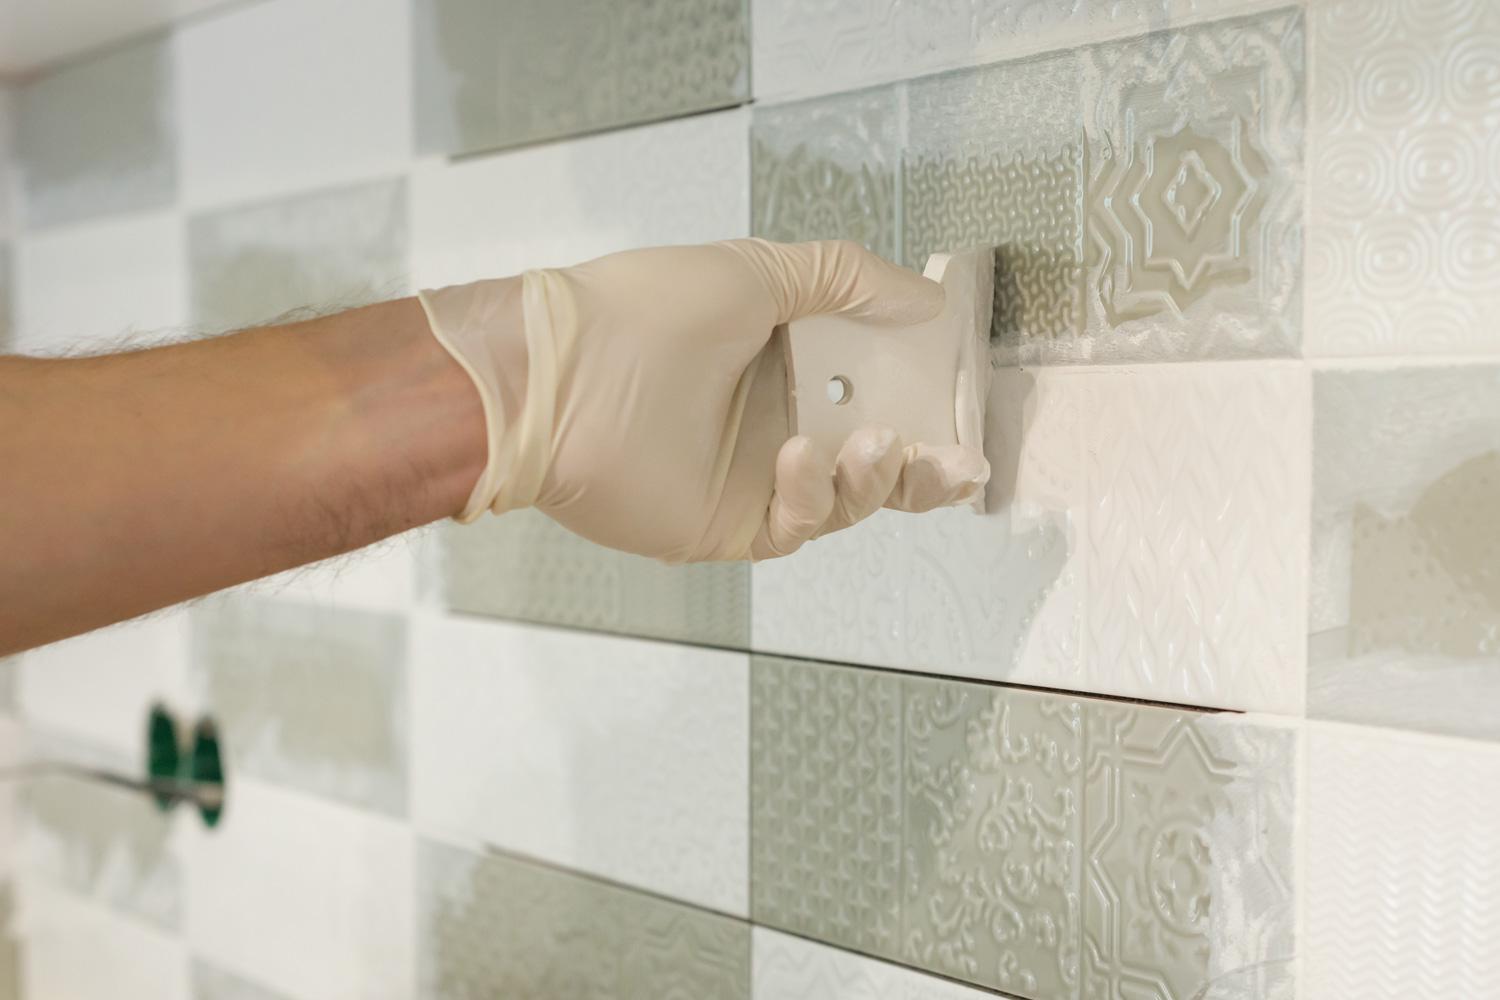 Closeup of tiler hand rubbing tile, Installing and grouting decorative finishes in environments with an high aesthetic value. Two-component, decorative, acid resistant epoxy grout.